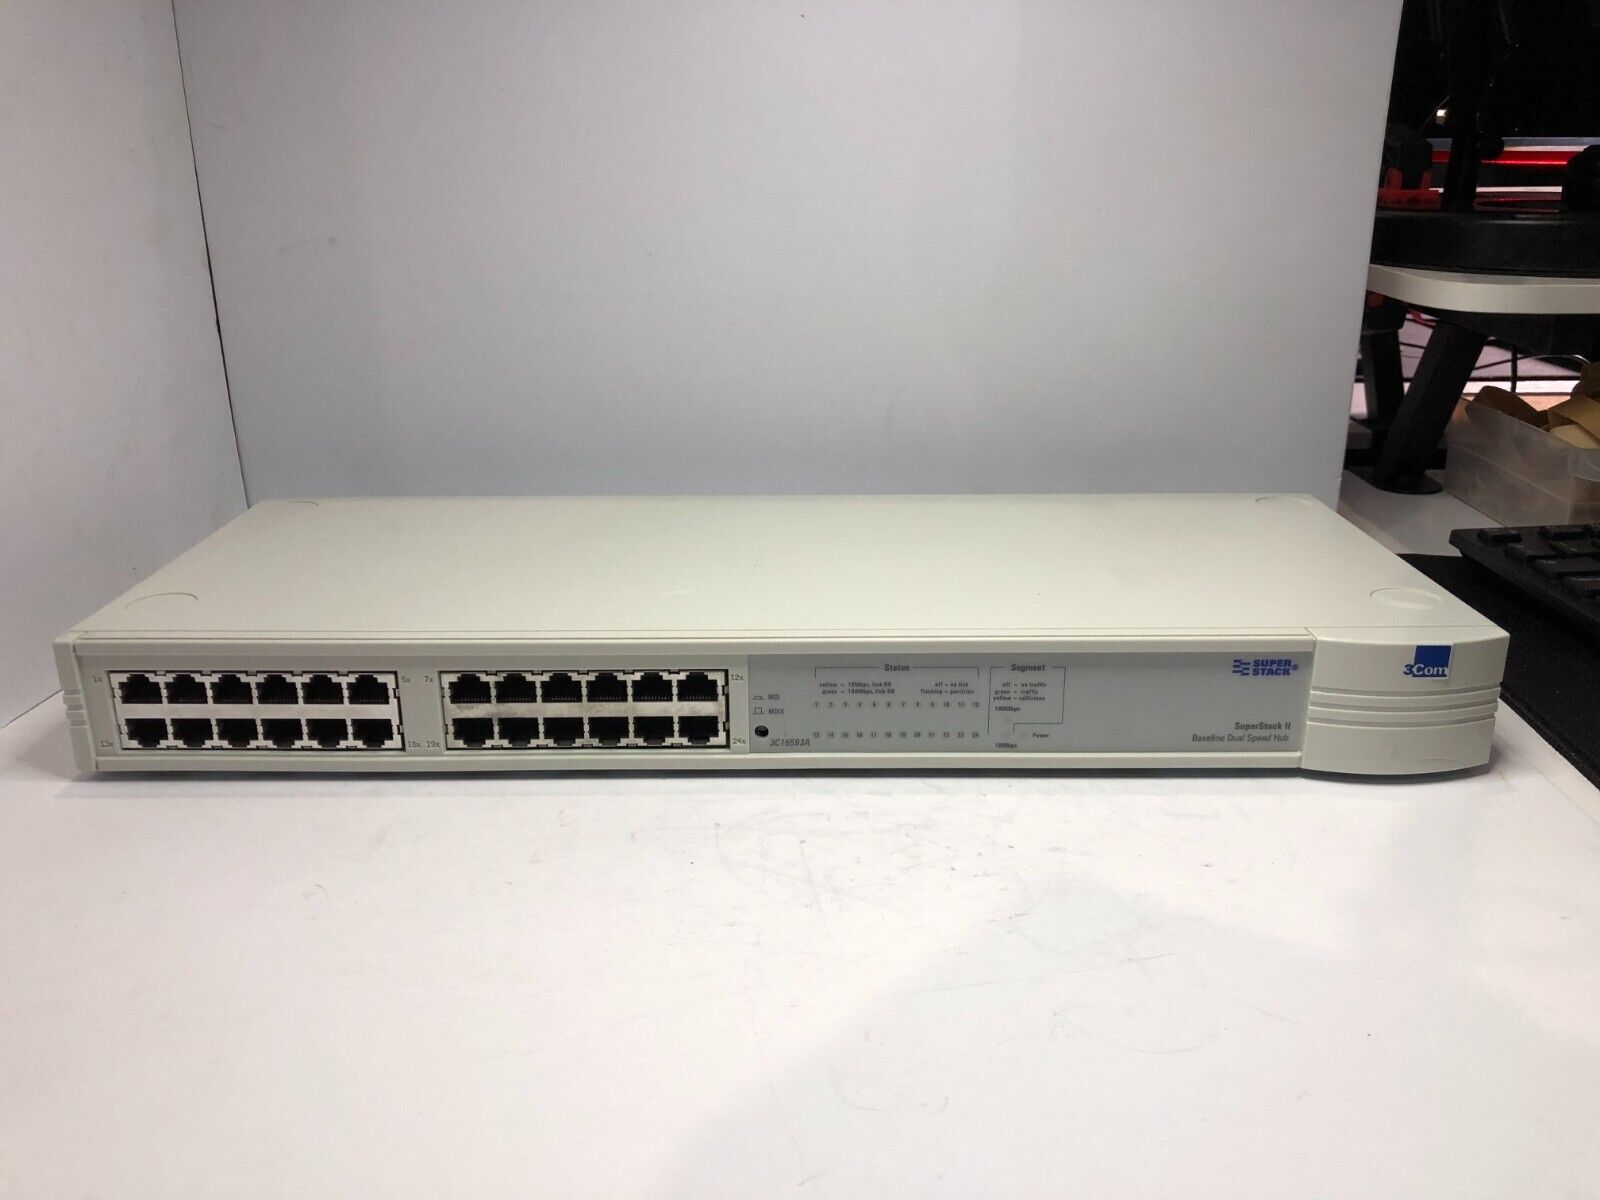 3Com Super Stack II | 24 Port Switch 3300 Dual Speed | 3C16980 | Tested USA